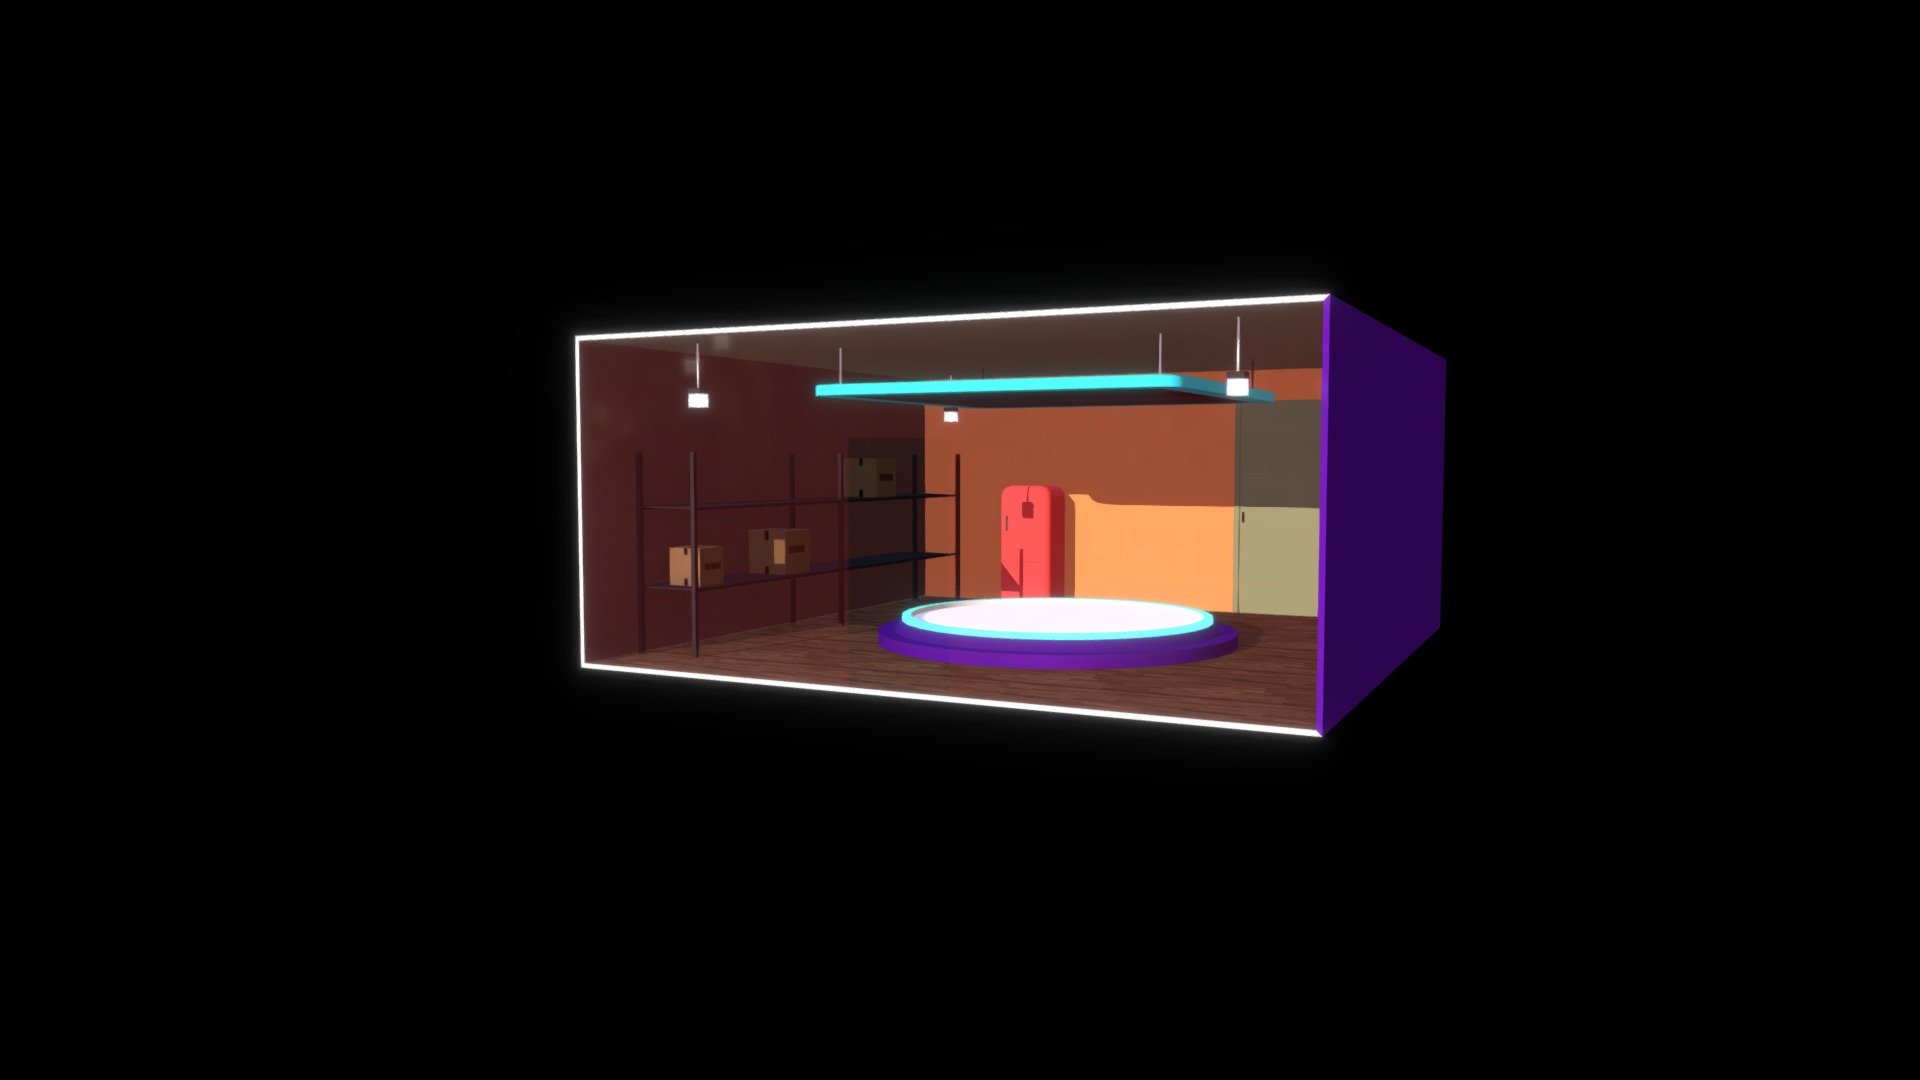 low poly 3d showroom..Low poly used for AR/VR metaverse decentraland

display your models in my showroom to customer - Low Poly decentraland showroom - 3D model by Vigneshwar (@rikki23) 3d model